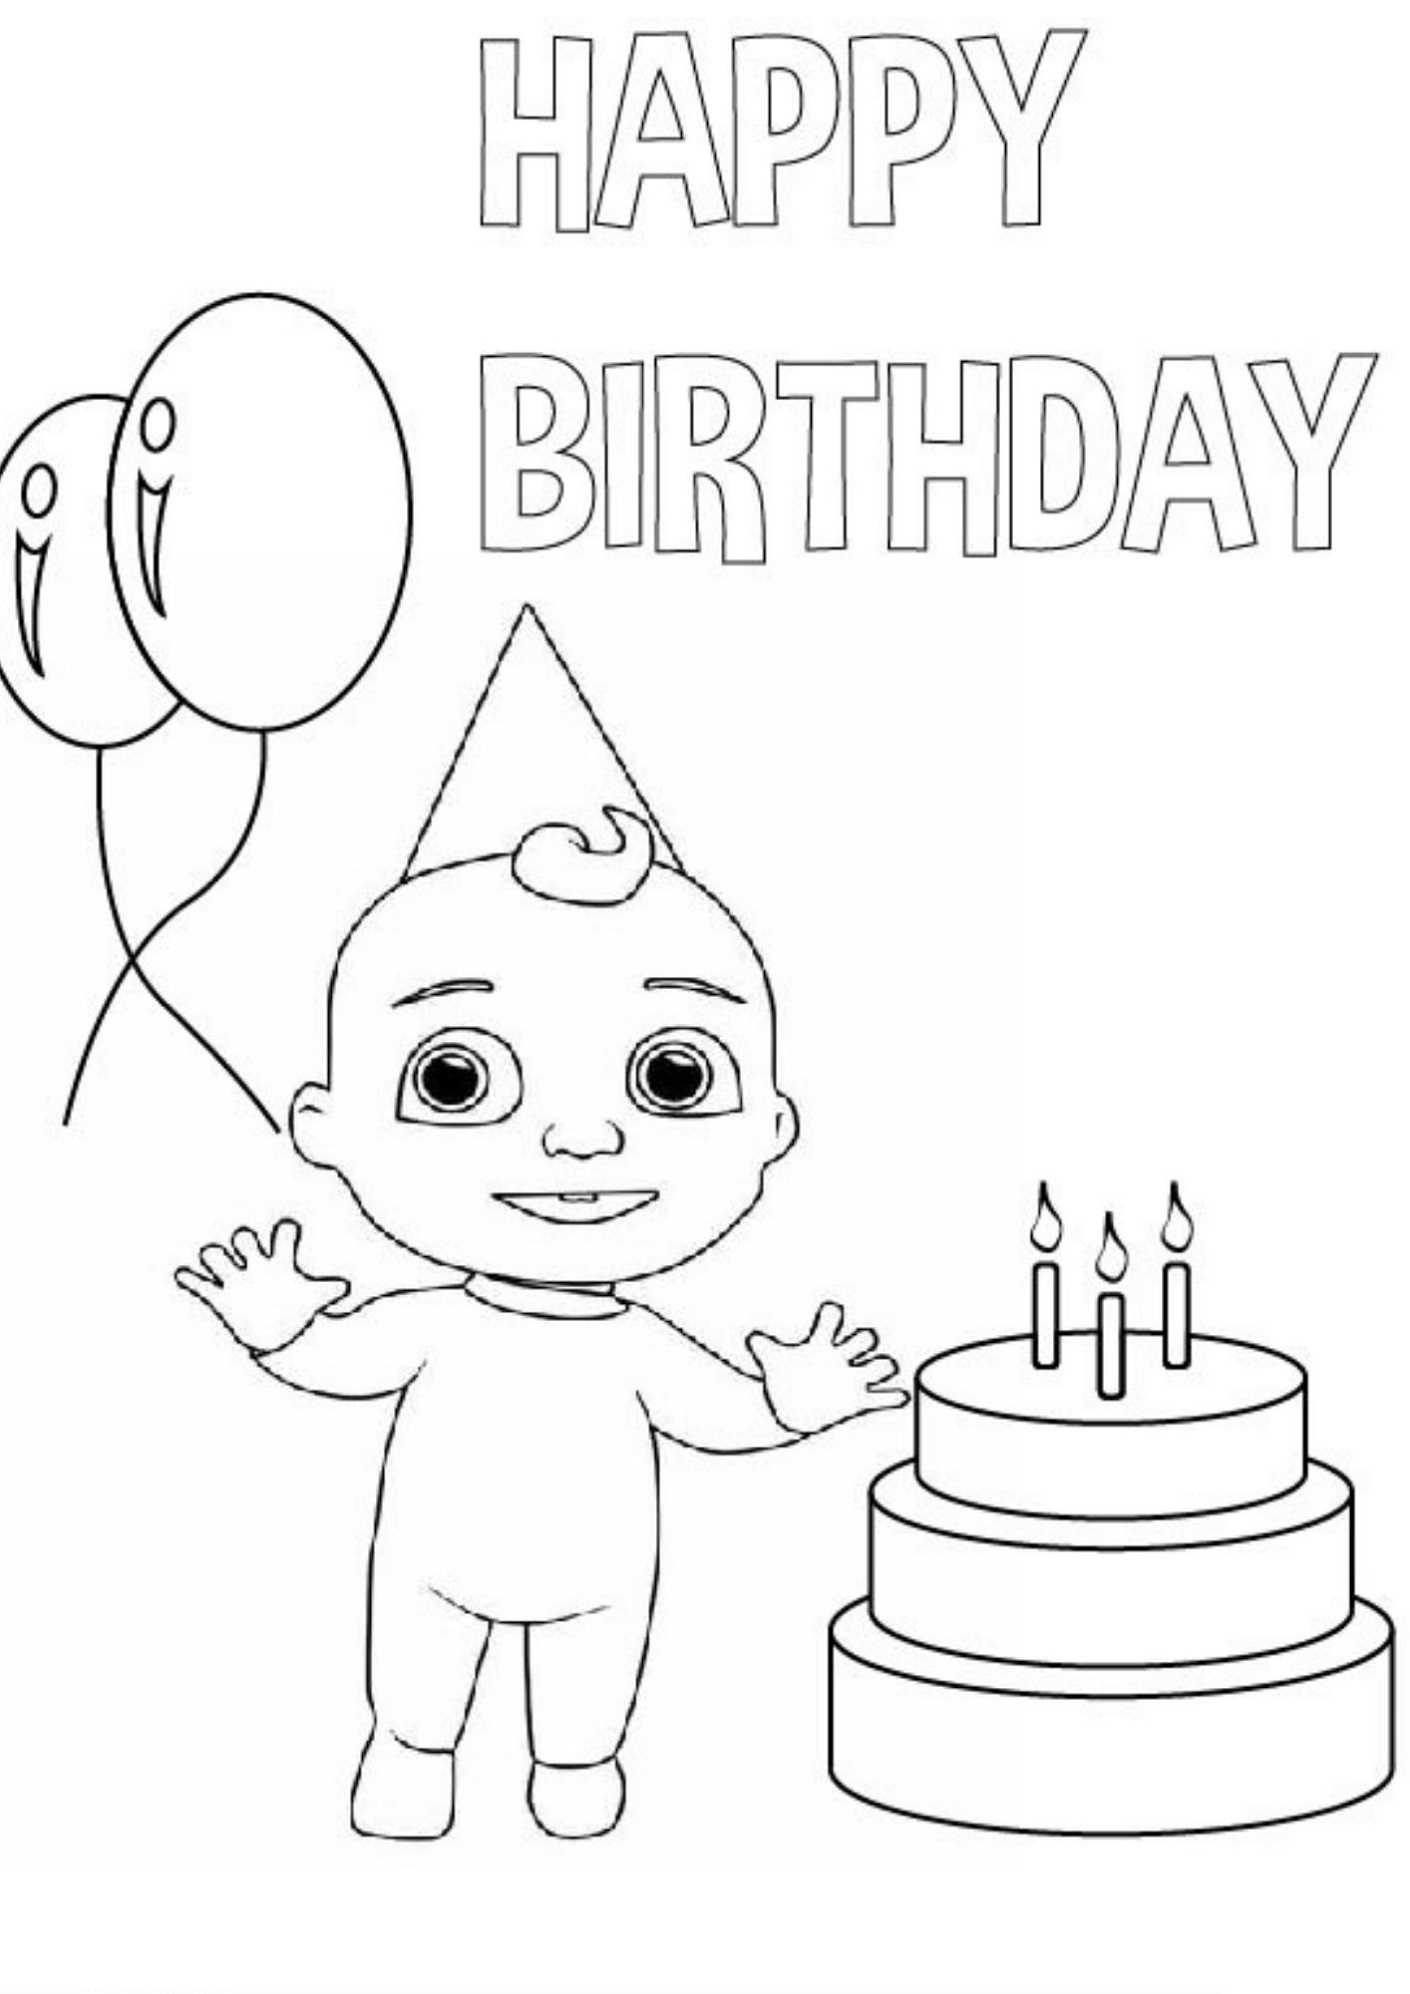 Birthday printable coloring pages activity shelter